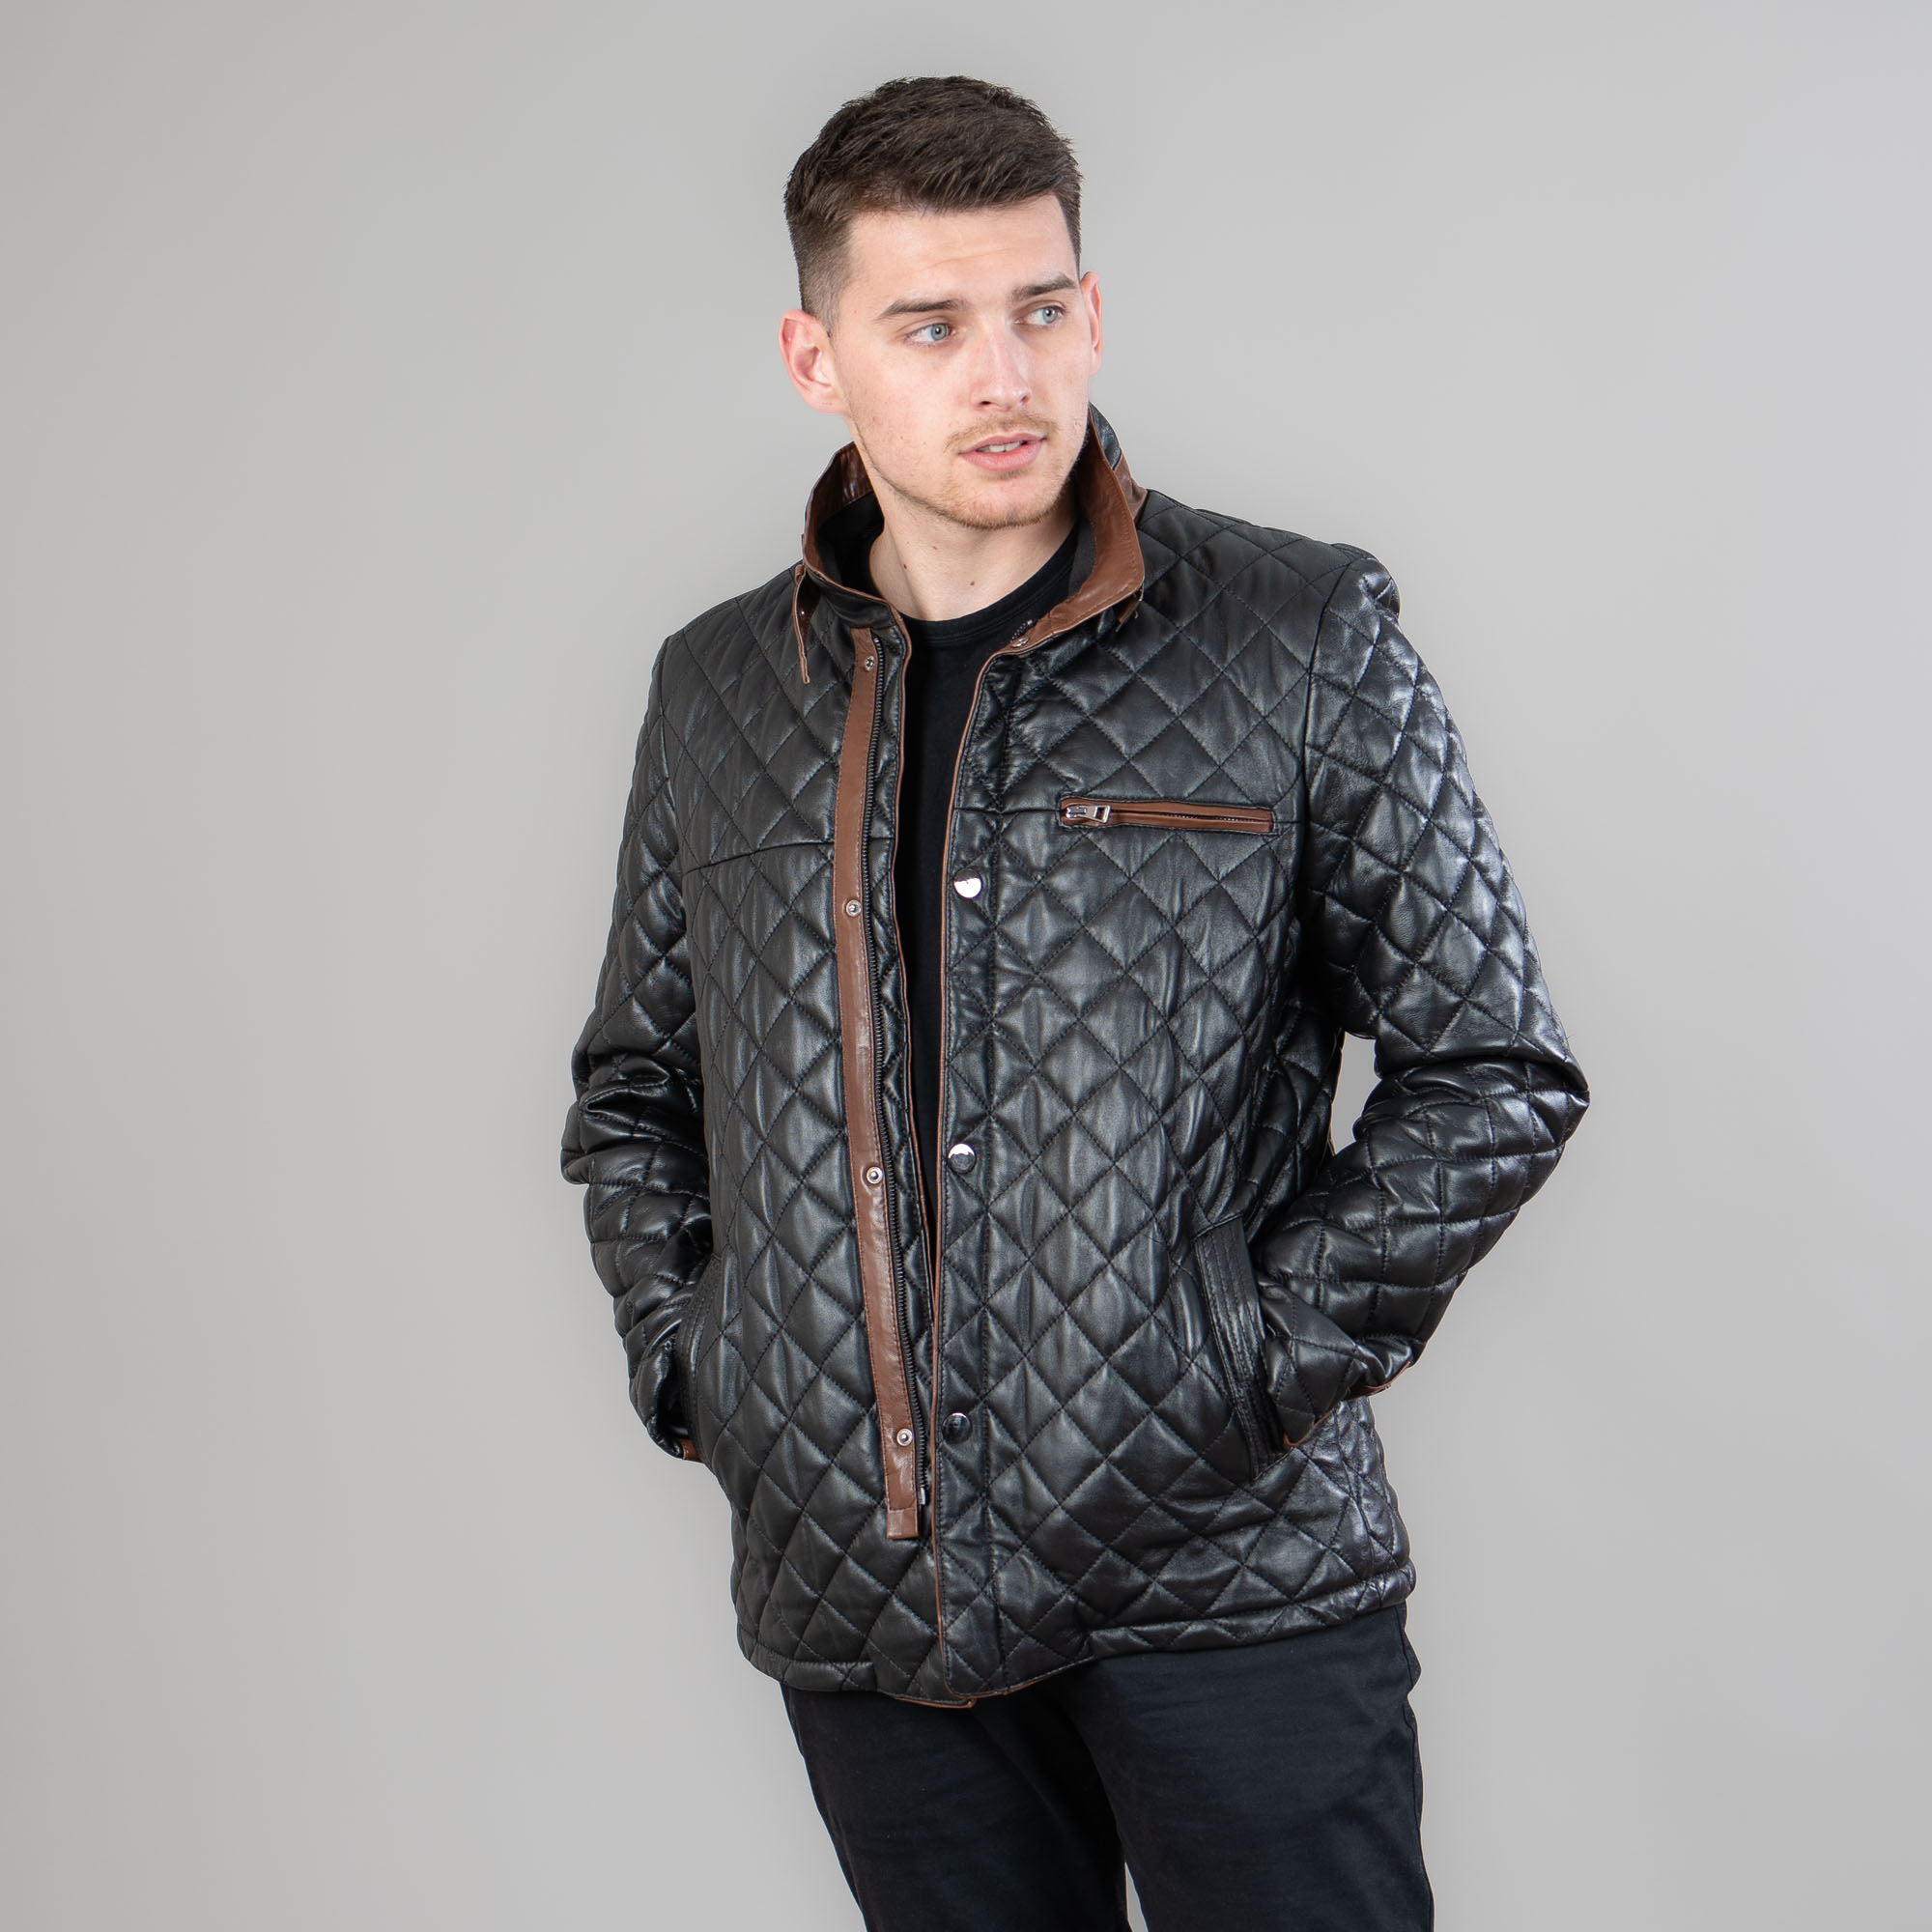 Black leather jacket with brown details